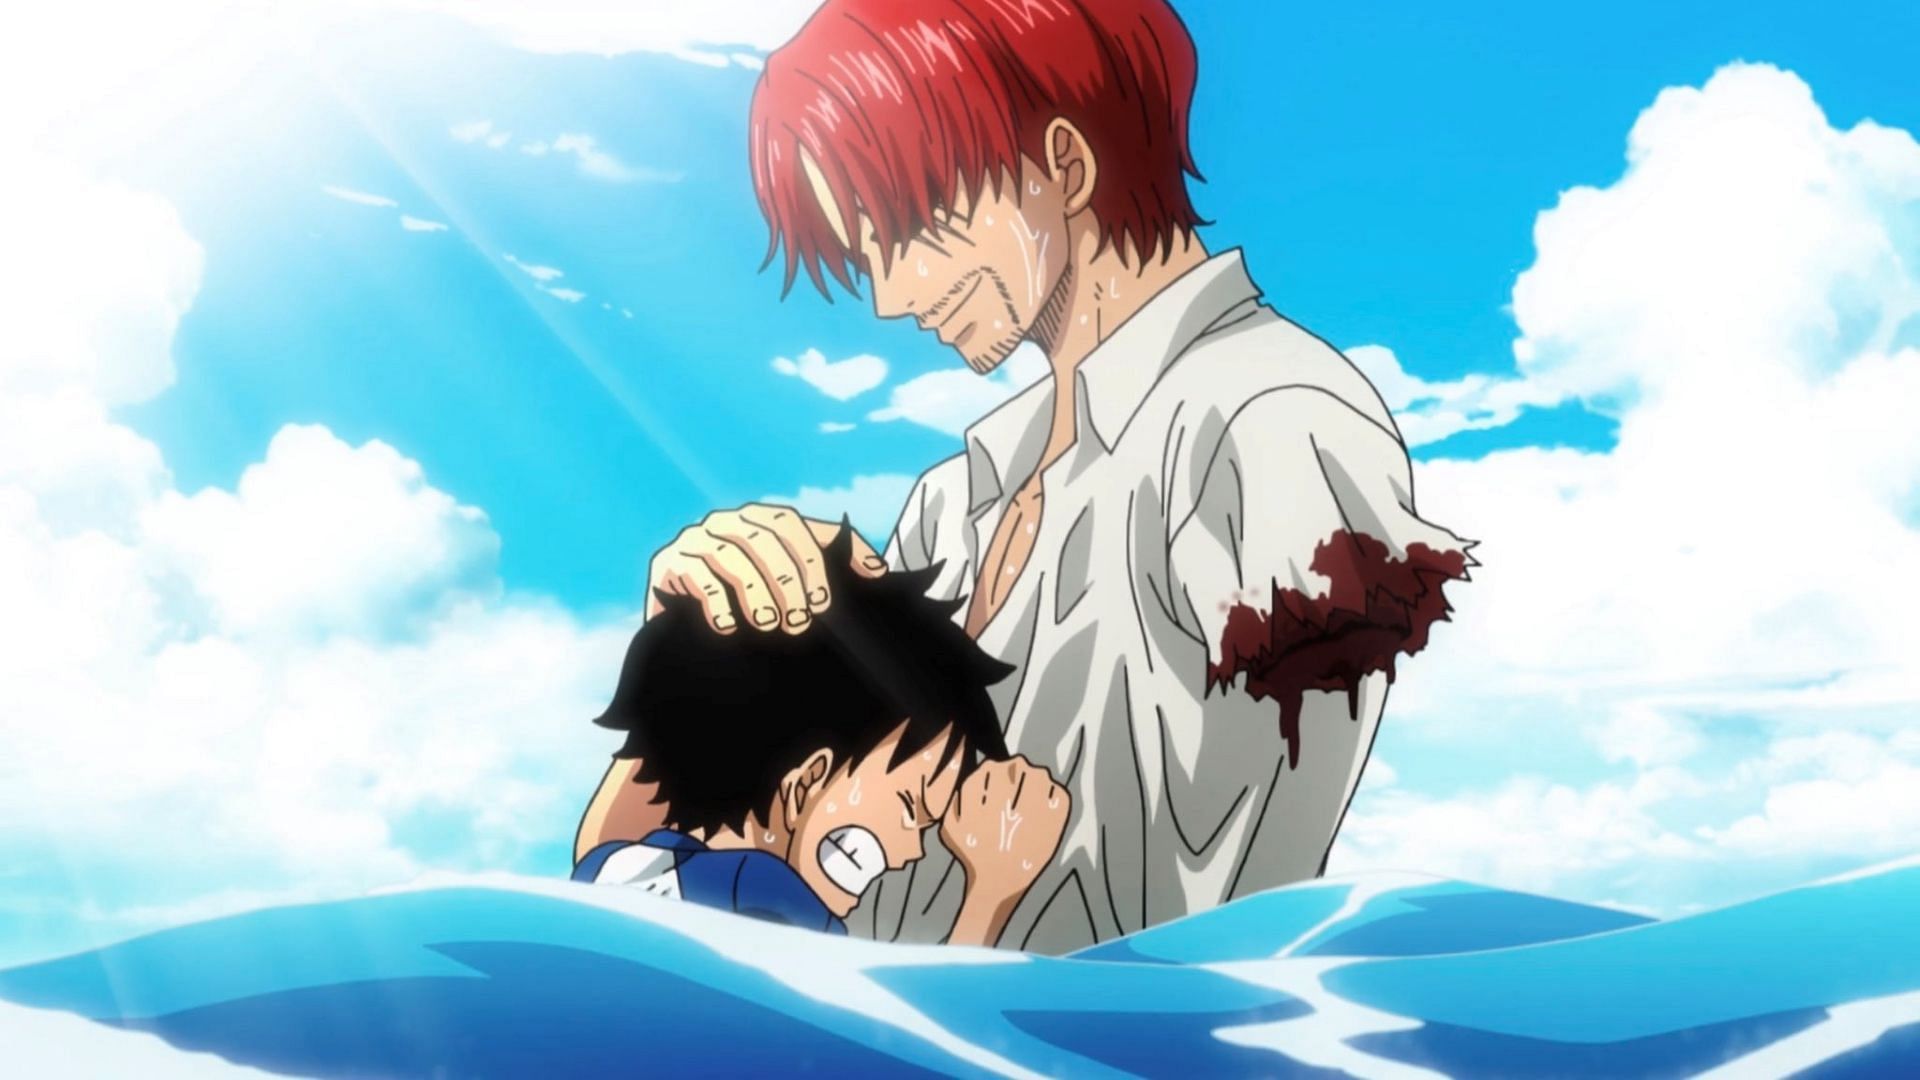 Shanks and Luffy as seen in One Piece Special Episode 4 (Image via Toei Animation)